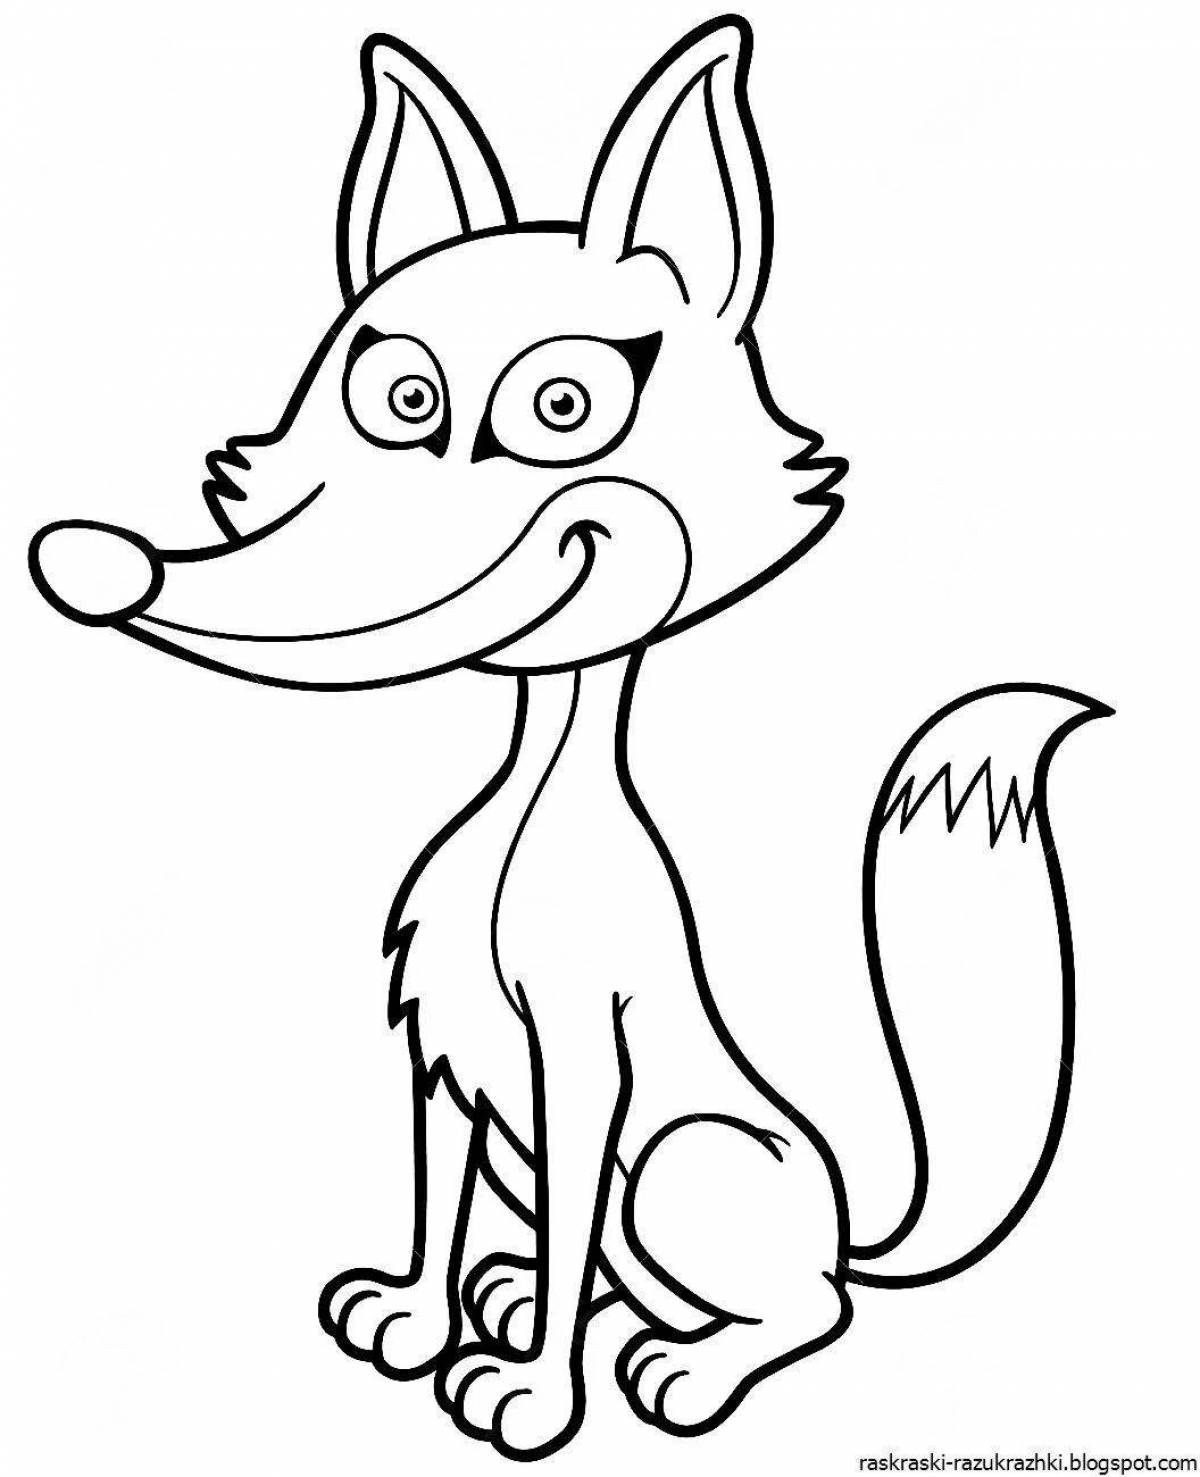 Coloring page charming cunning fox